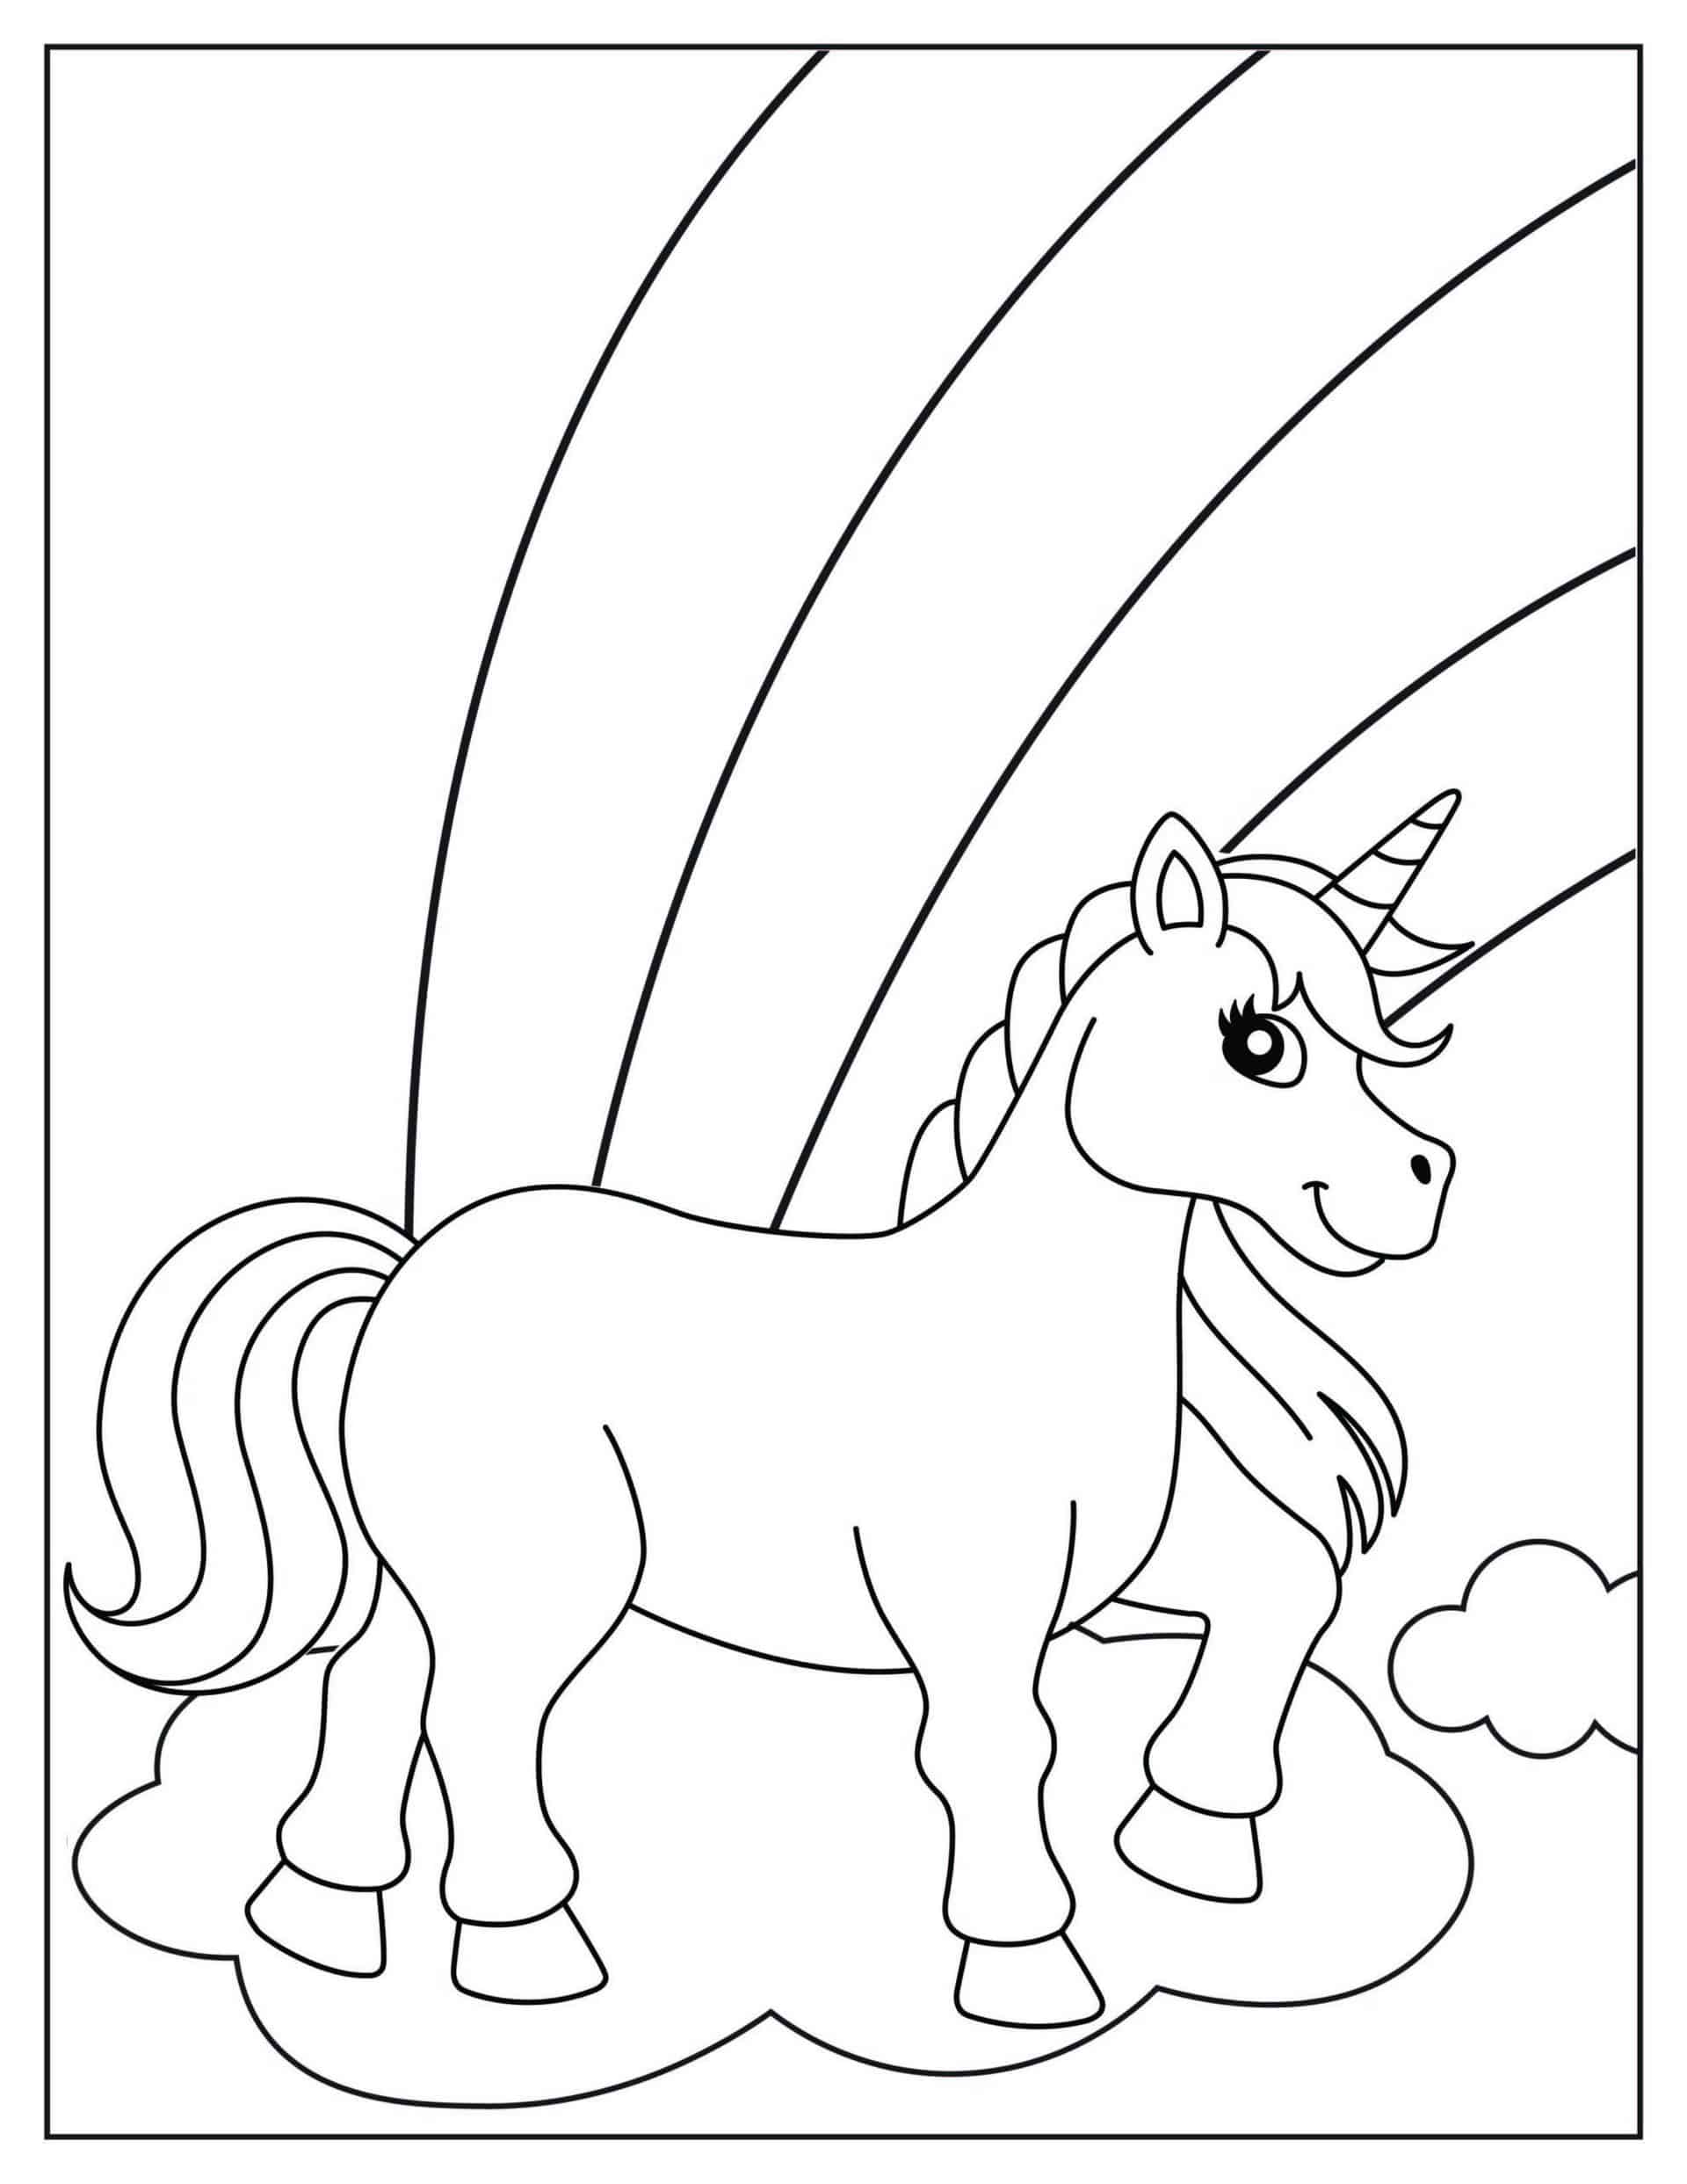 Unicorn and Rainbow Coloring Pages Image 1